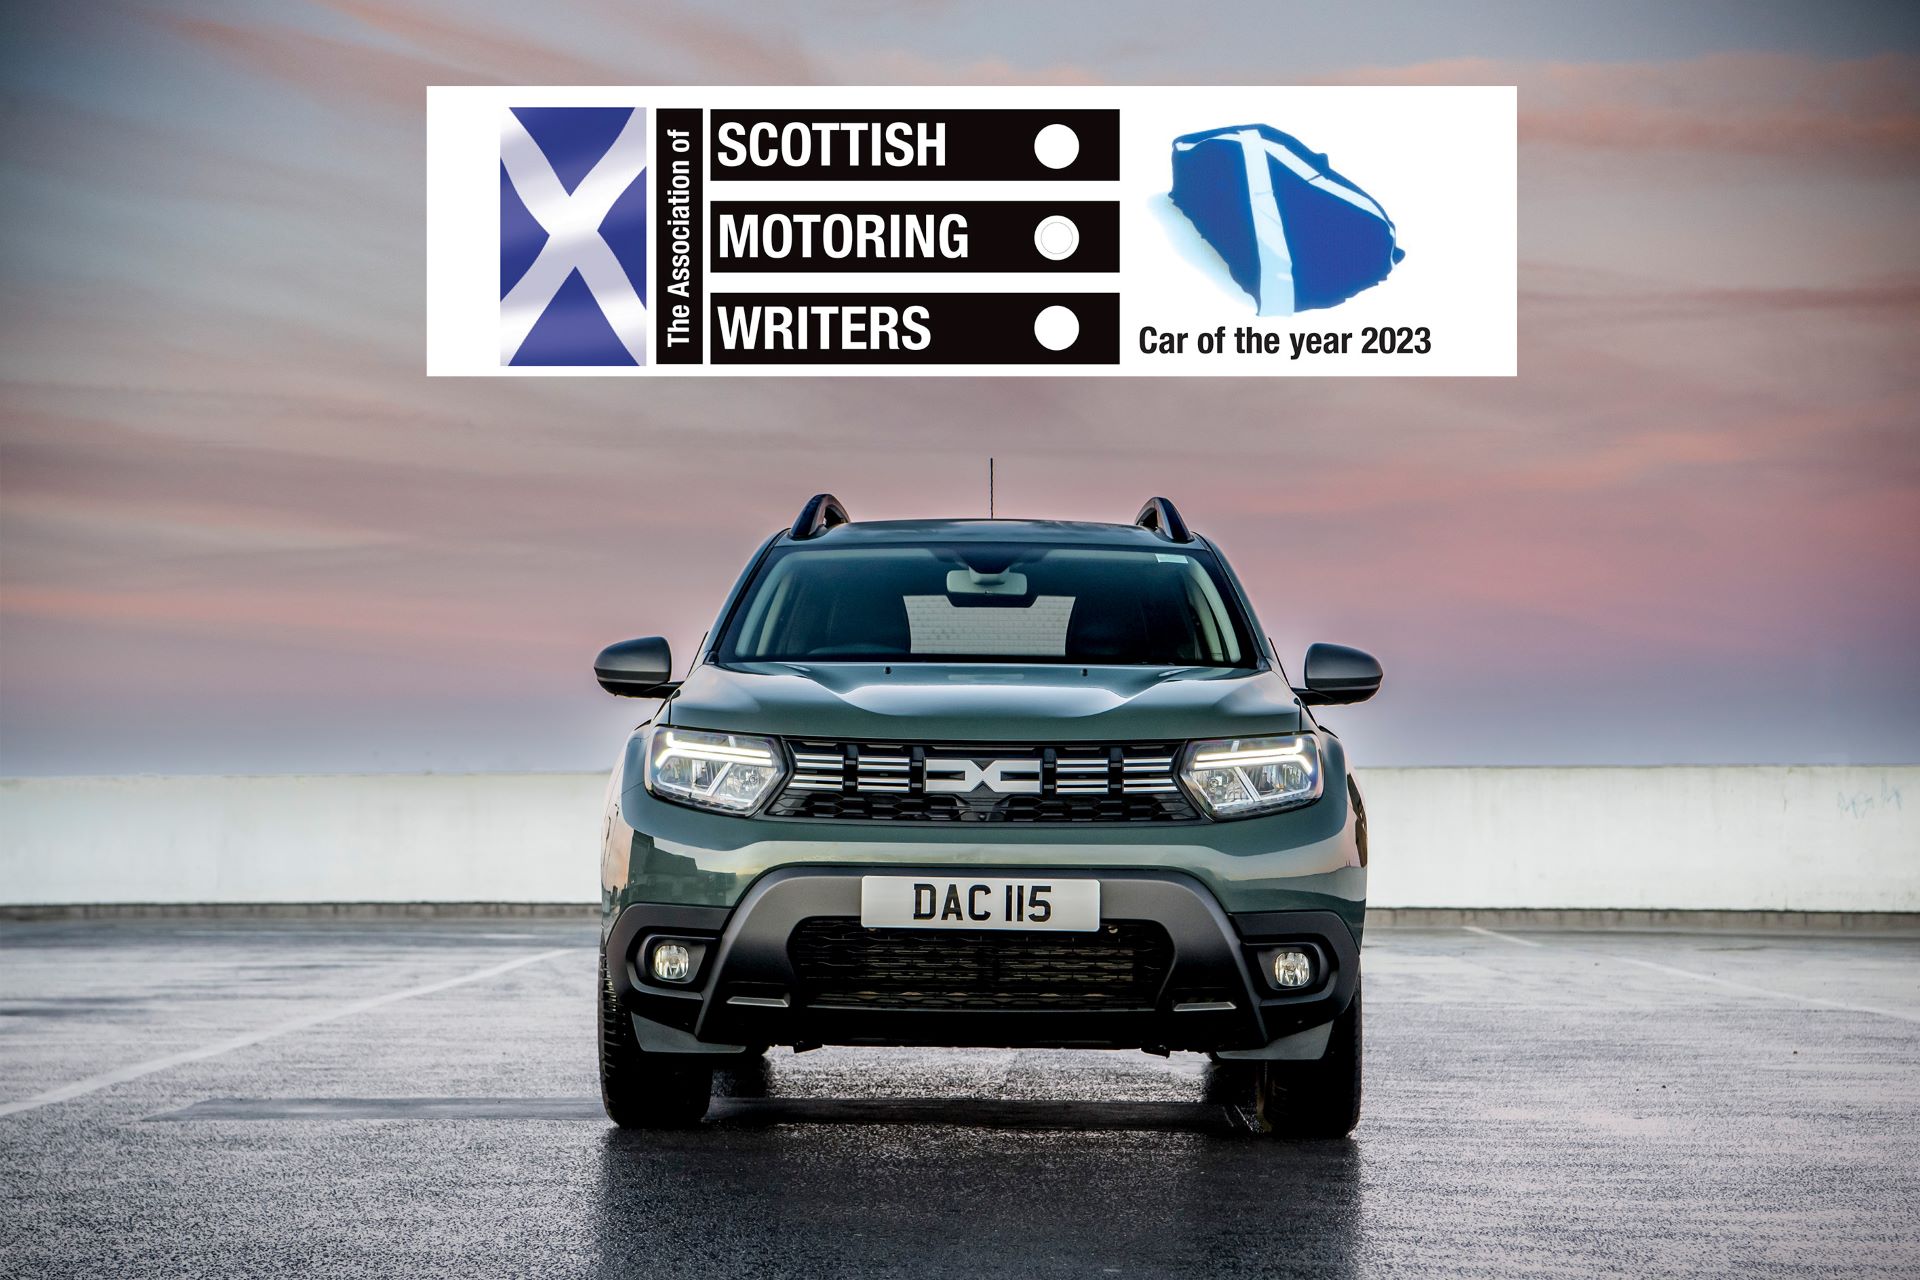 Dacia Duster named Best Small Car / SUV at the Scottish Car of the Year Awards